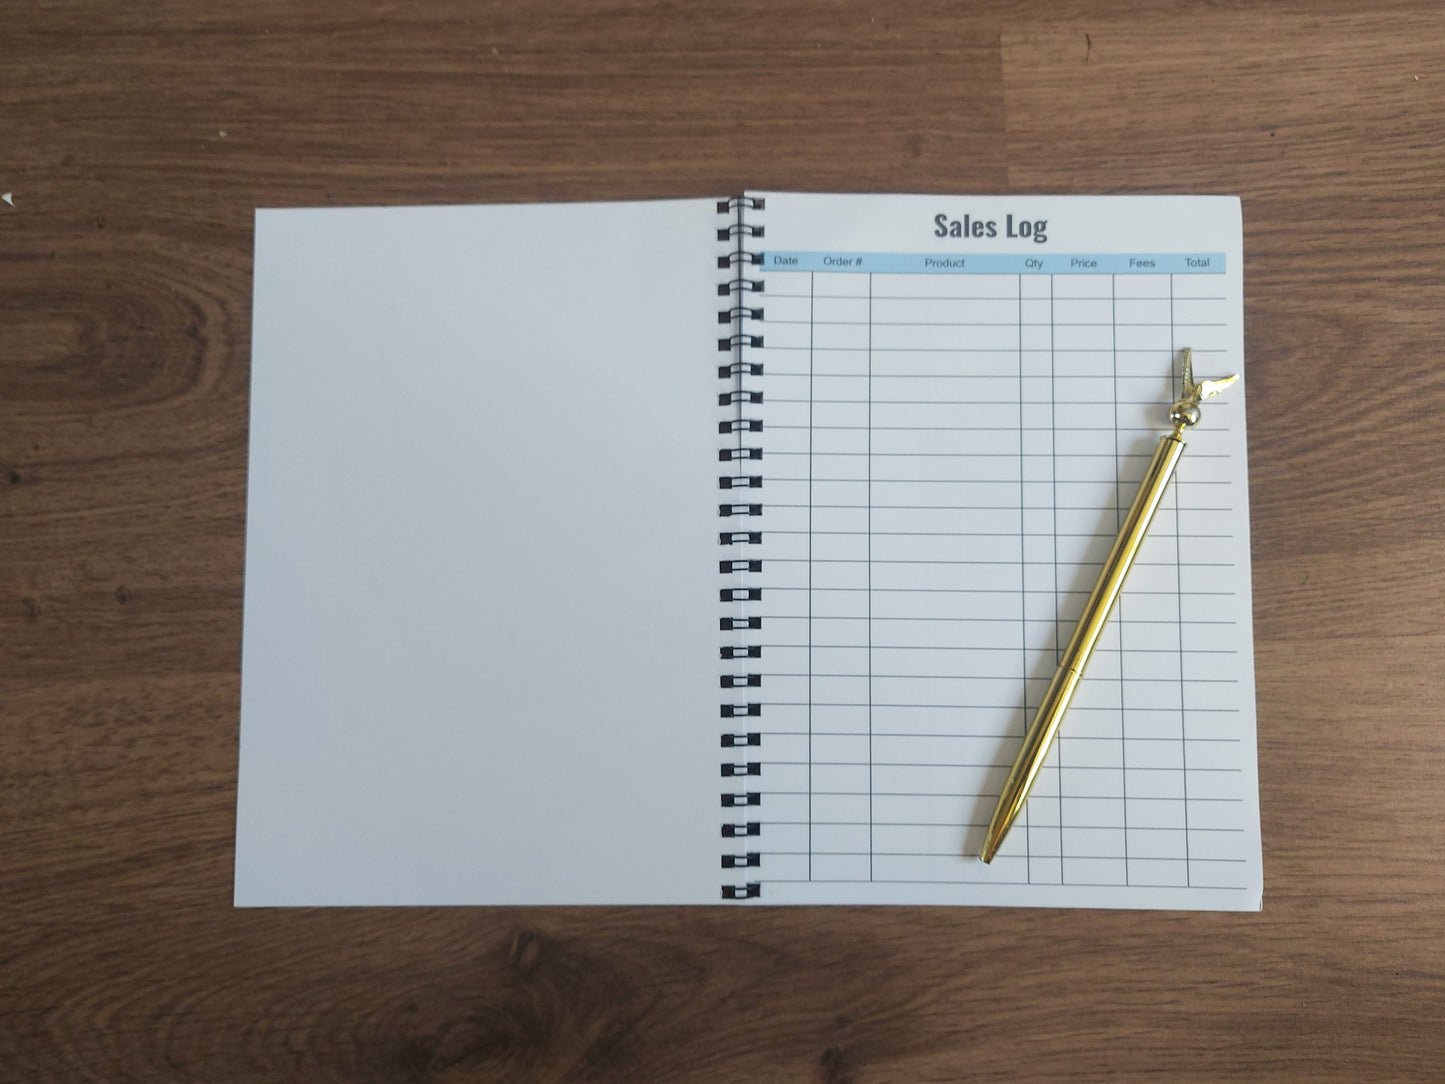 Business logo sales tracker, account book, craft fair tracker, sales record book, record book, accounts